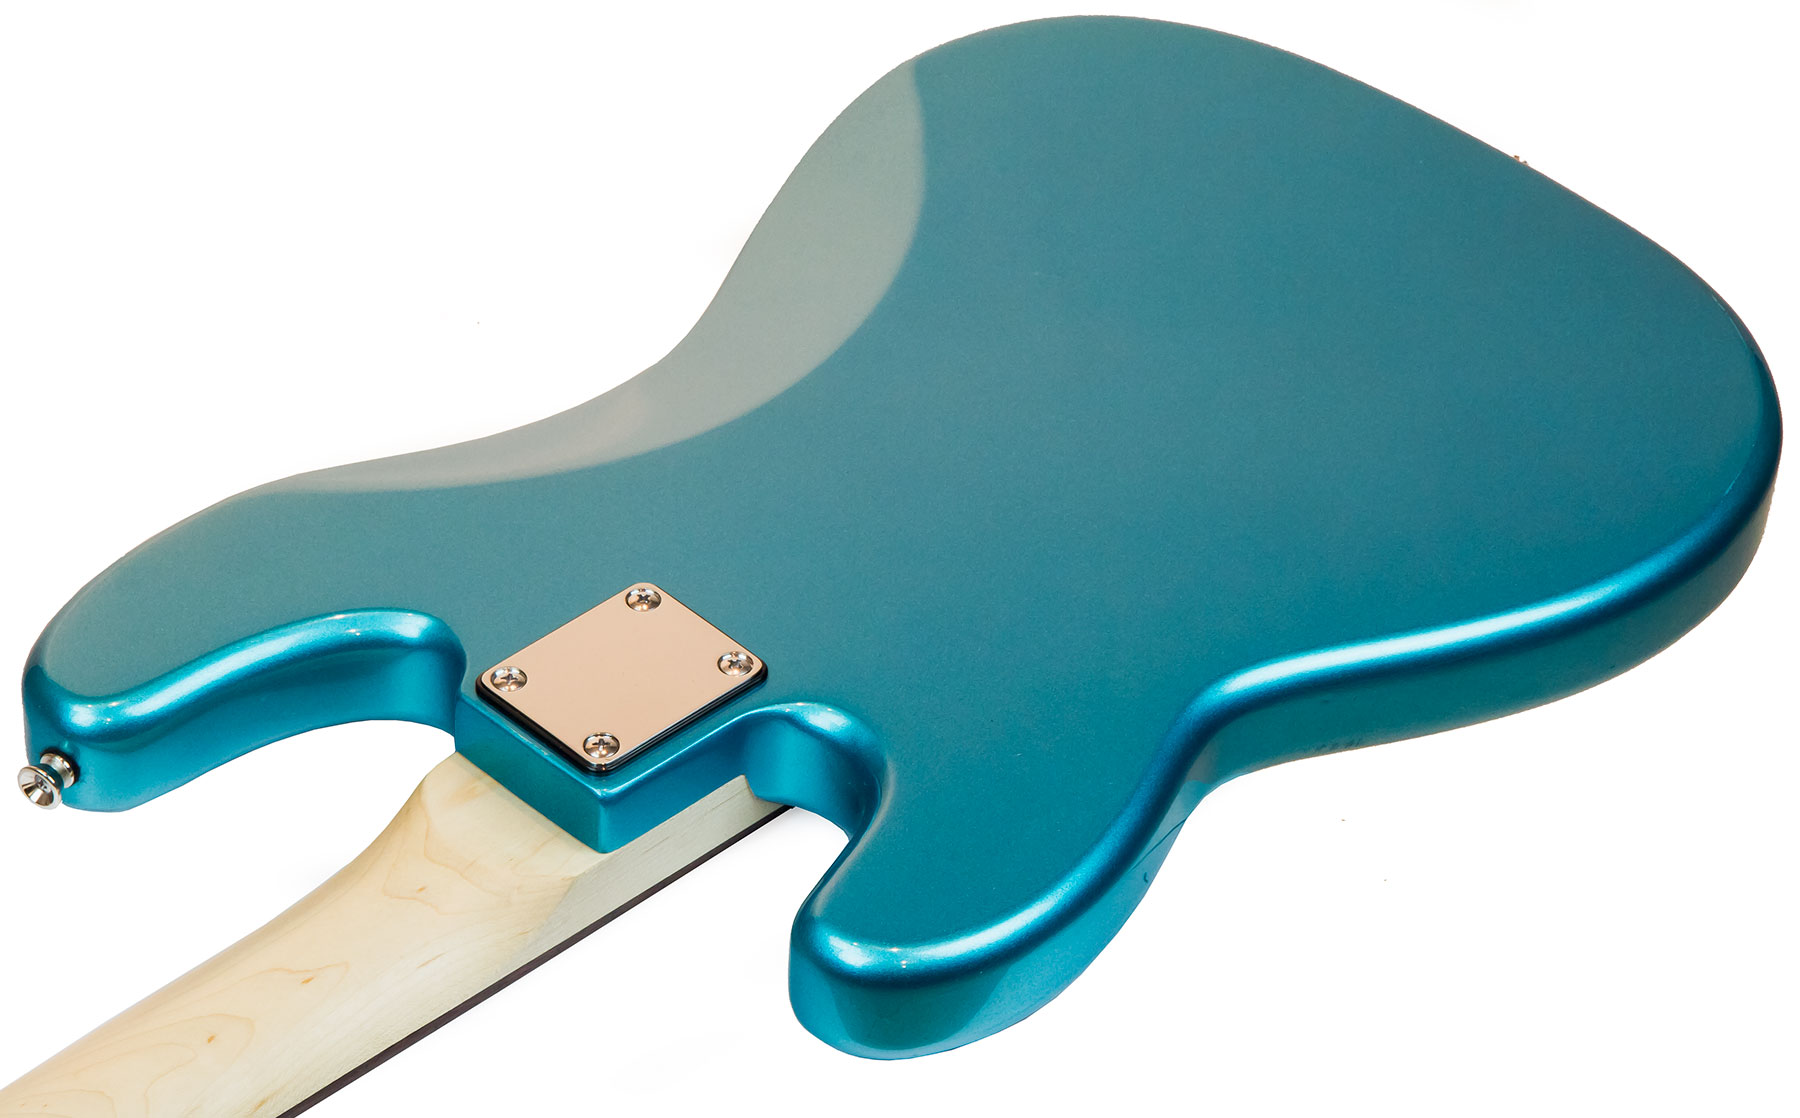 Eastone Prb Pur - Metallic Light Blue - Solid body electric bass - Variation 3